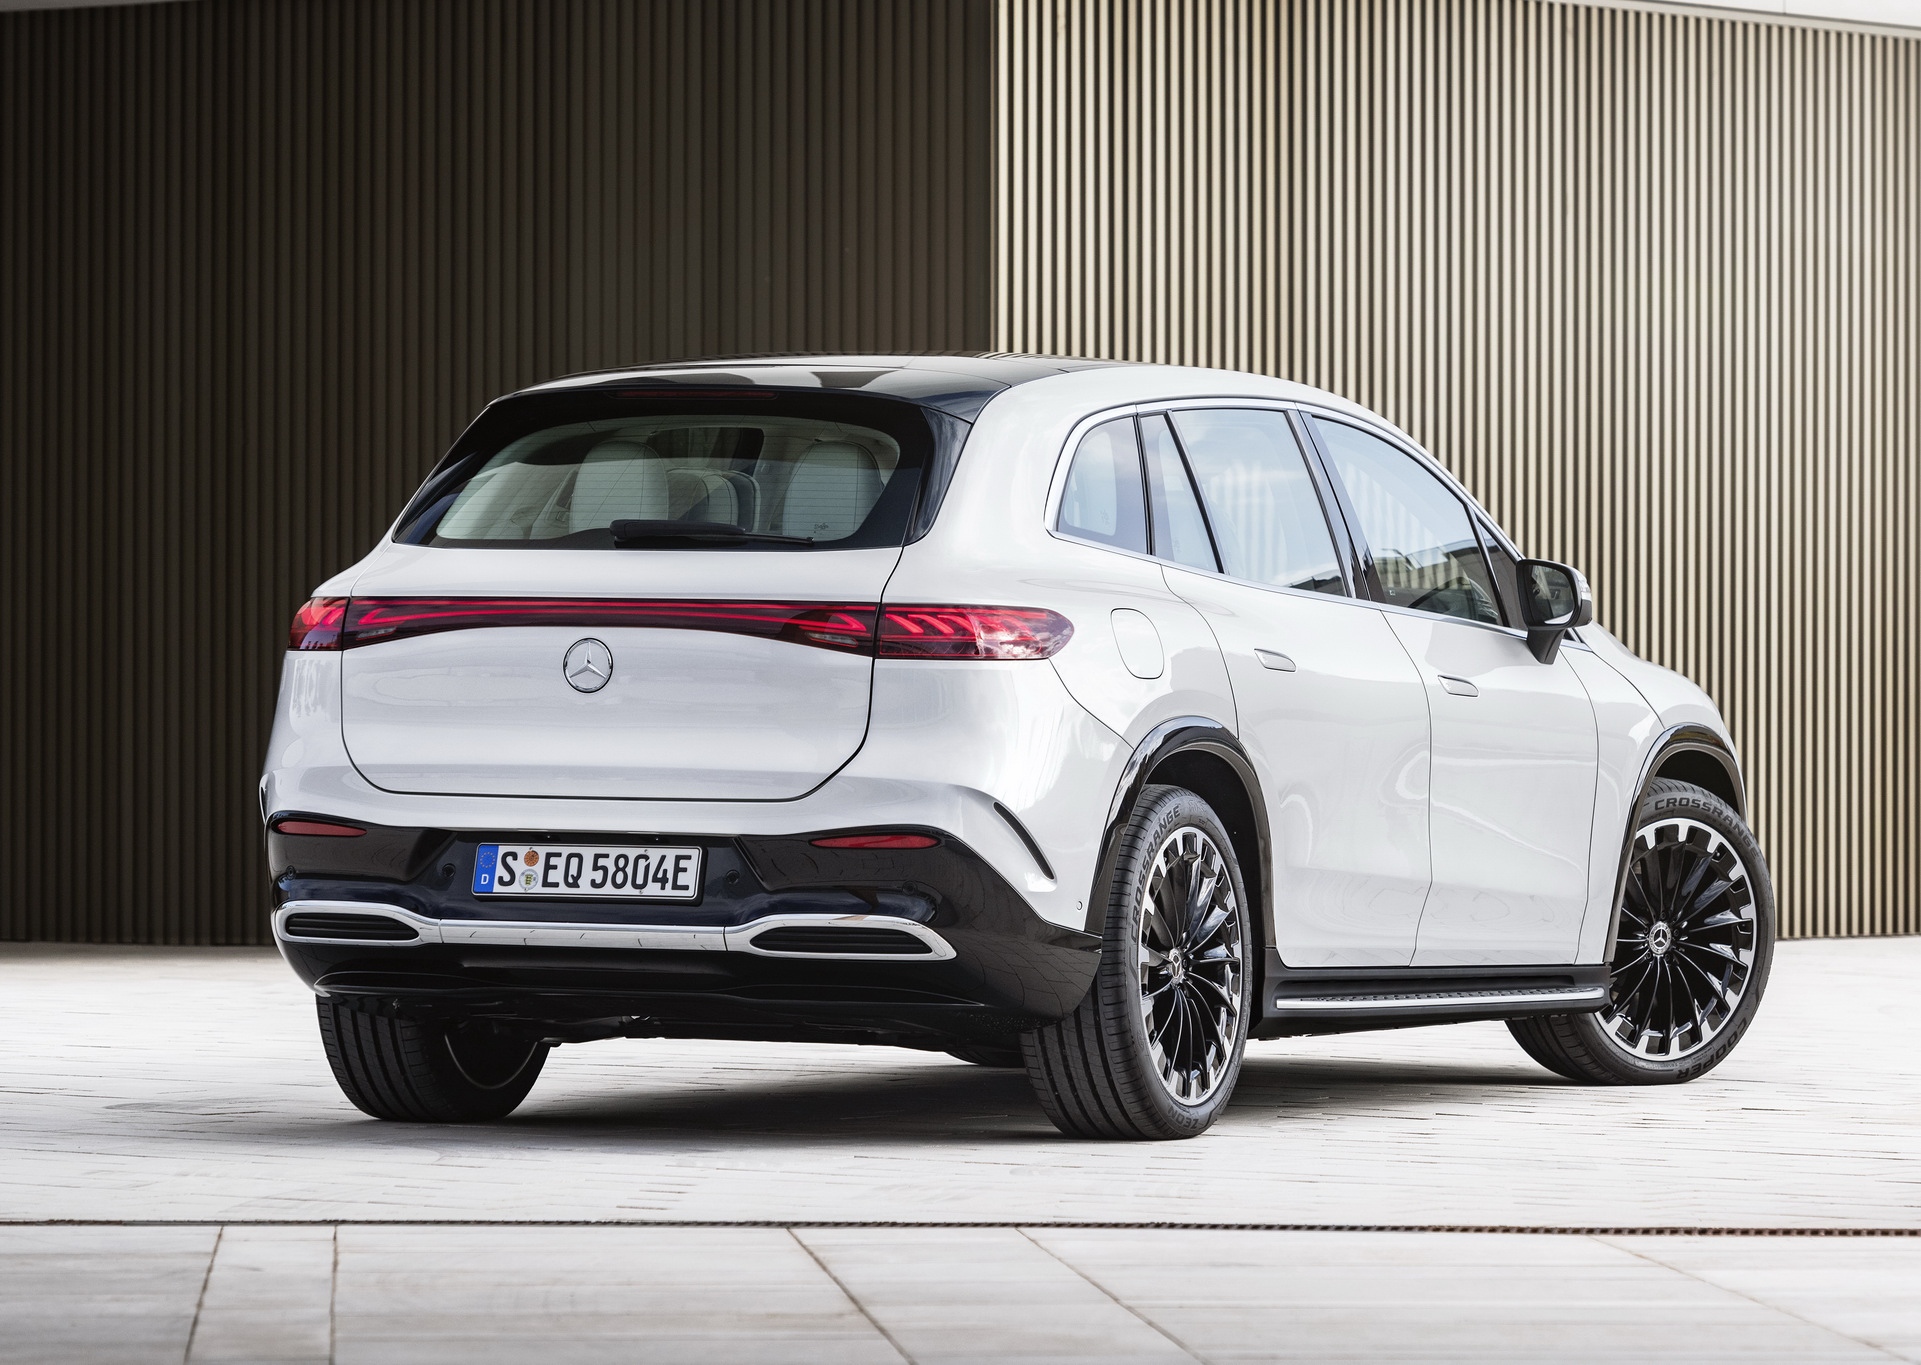 The Mercedes-Benz EQS super product officially has an SUV version - the 'new king' of the electric luxury SUV segment is here - Photo 4.